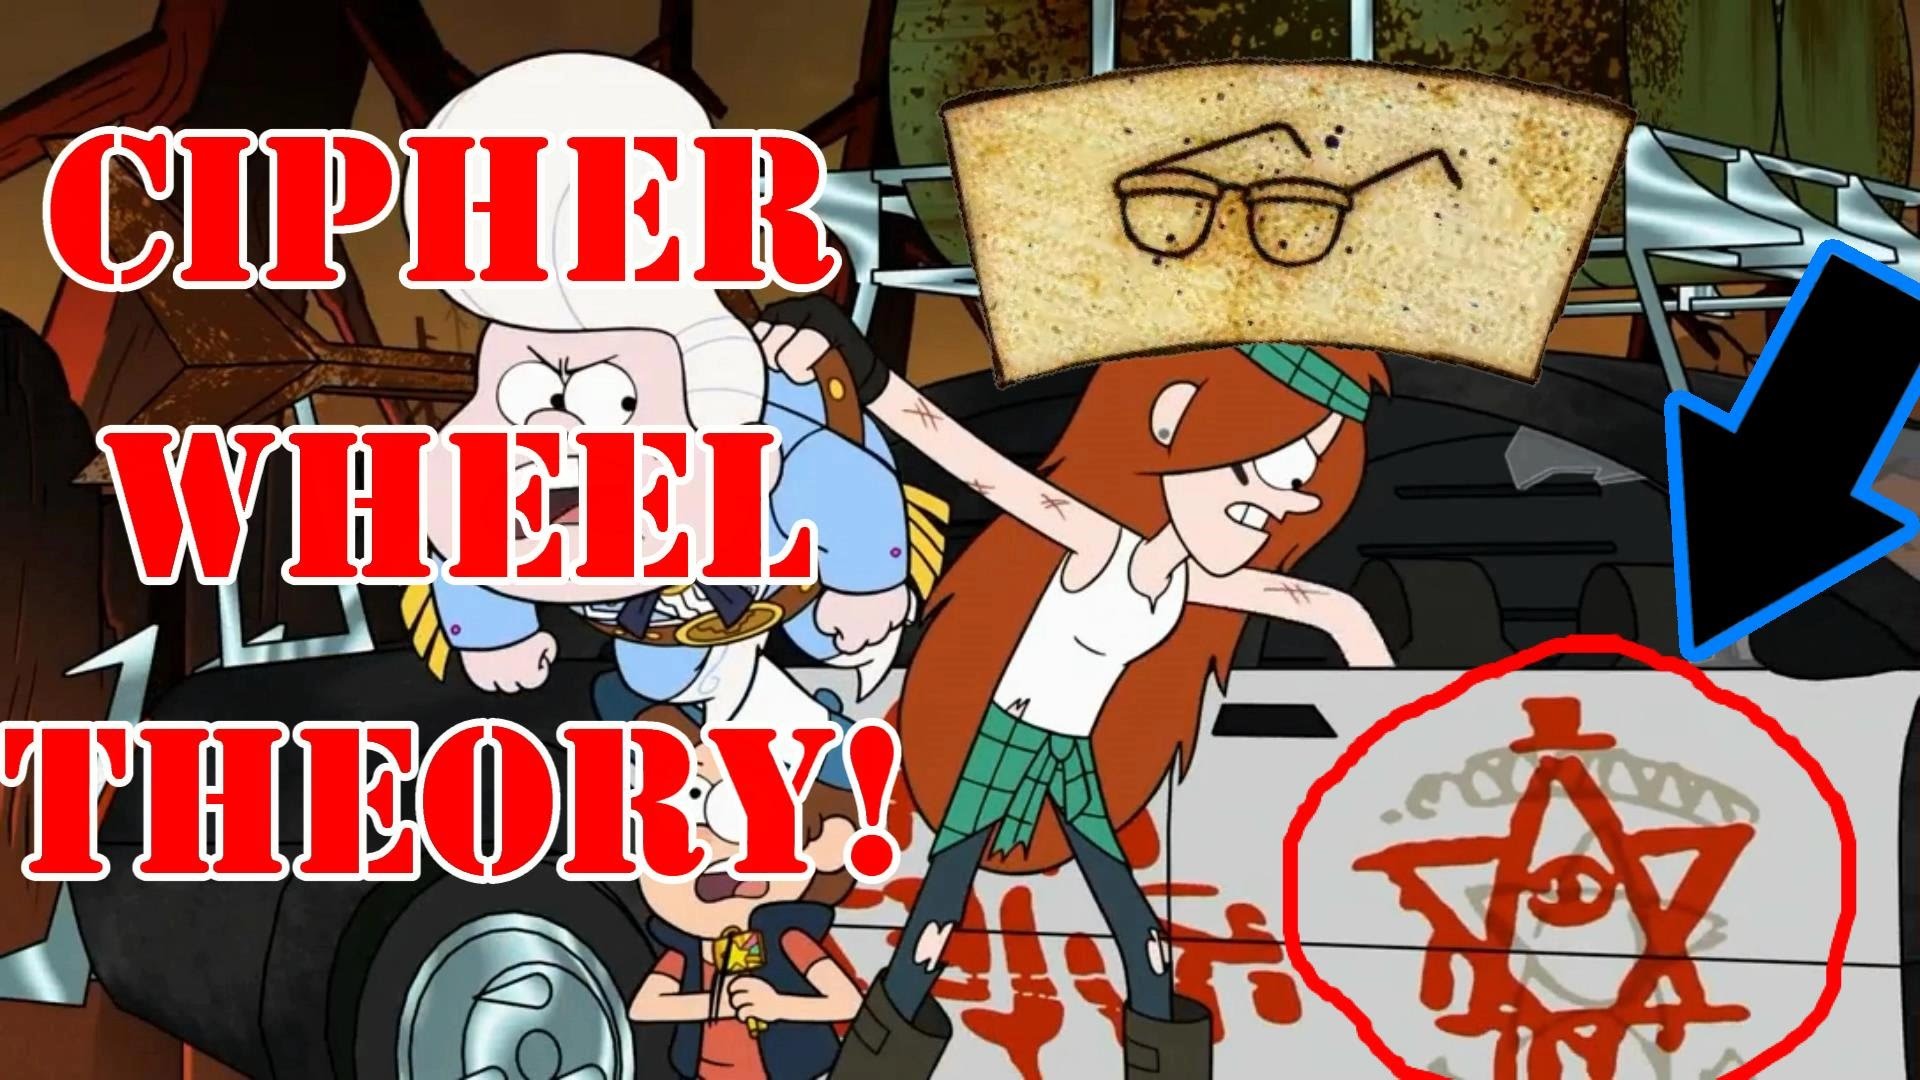 Gravity Falls Confirmed Cipher Wheel Theory TheNextBigThing – YouTube